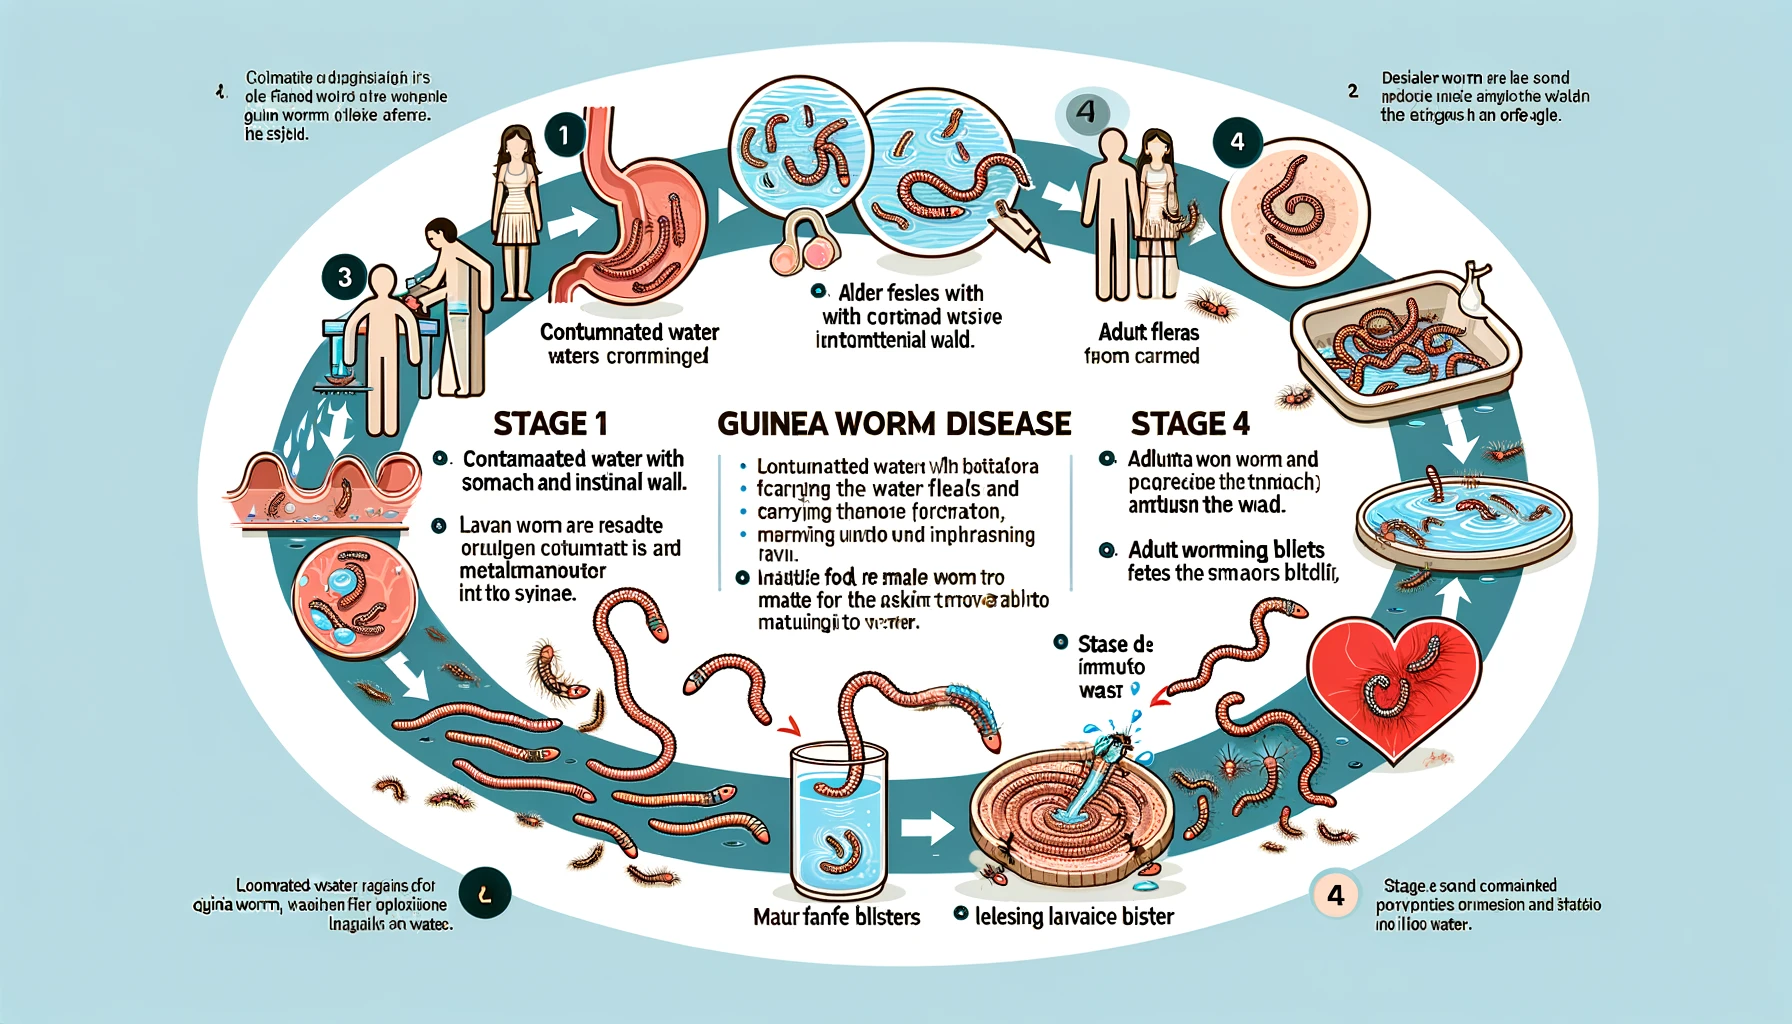 how does Guinea Worm Disease works